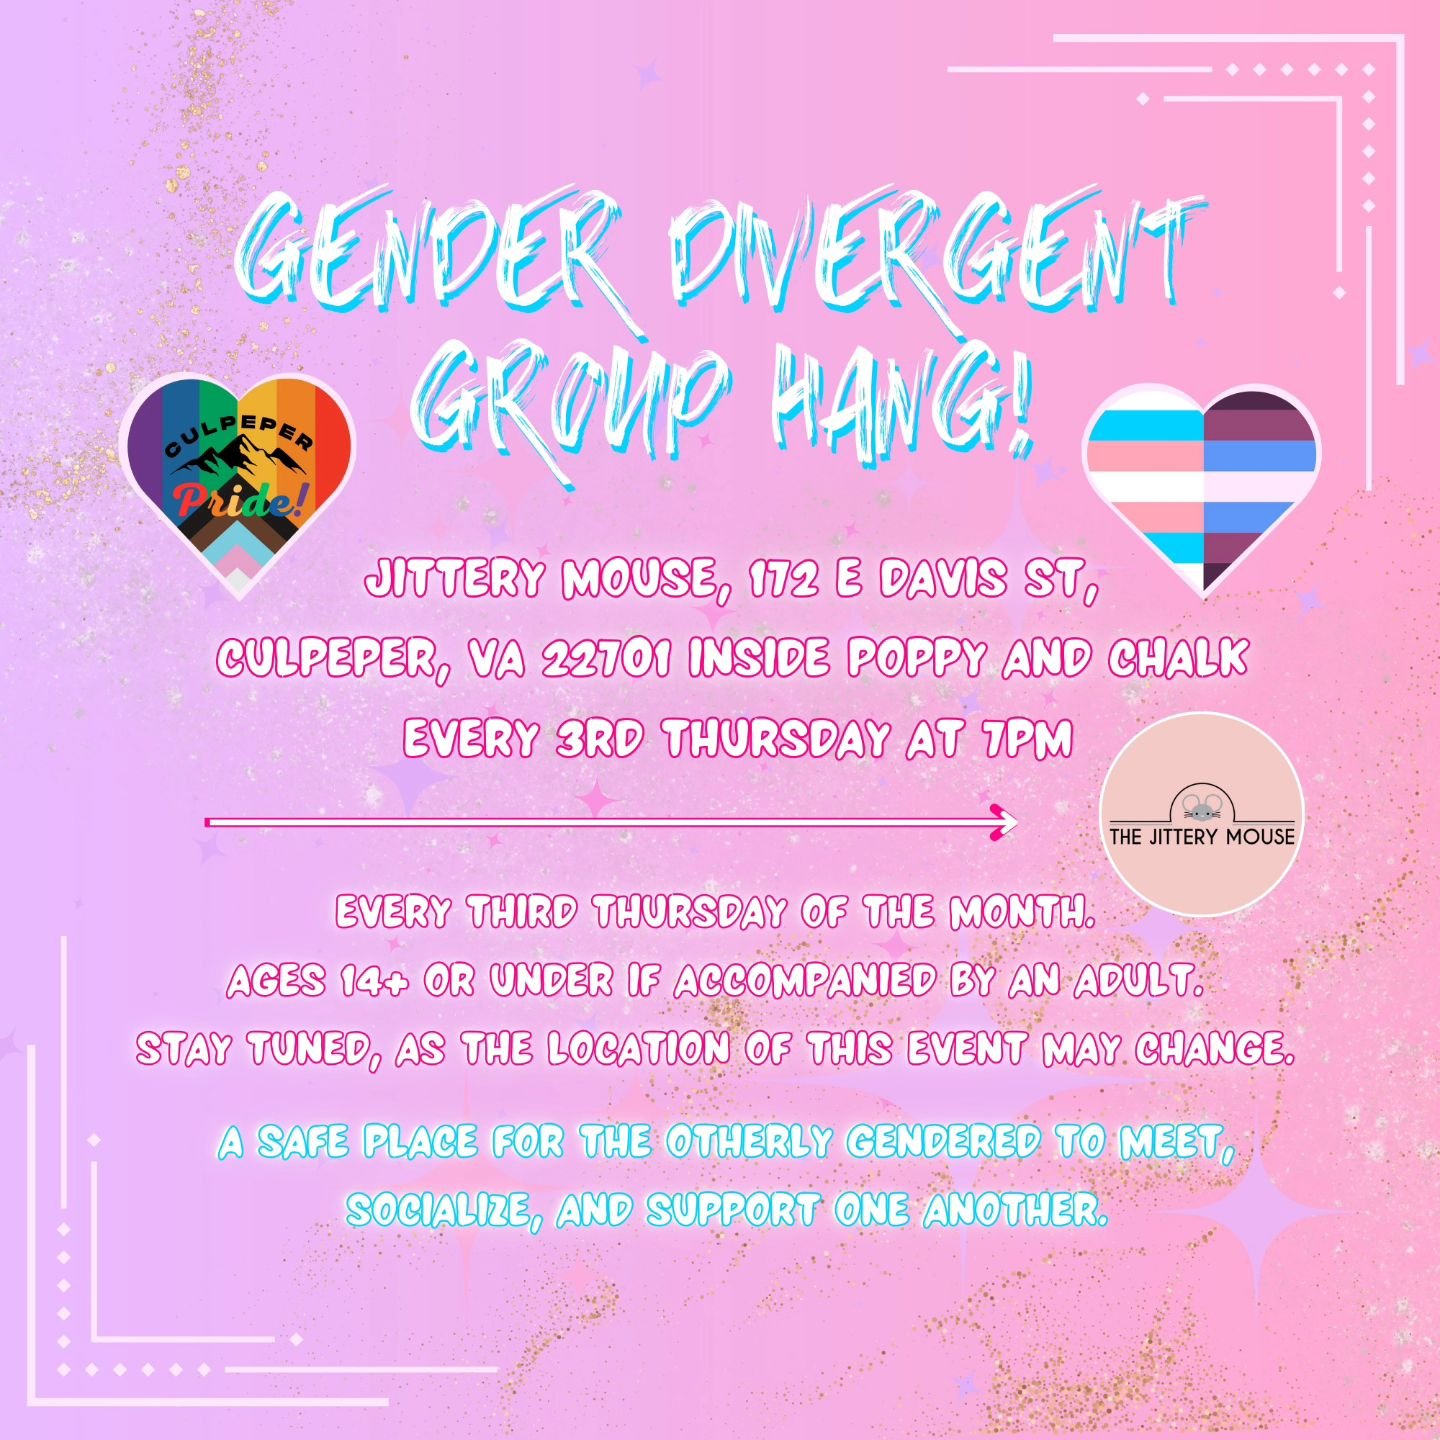 From now on, the Gender Divergent Group Hangout will be held at the Jittery Mouse on the third Thursdays of the month at 7PM! Join other queer gender diverse individuals for an evening on fun THIS week on April 18th! 🙂